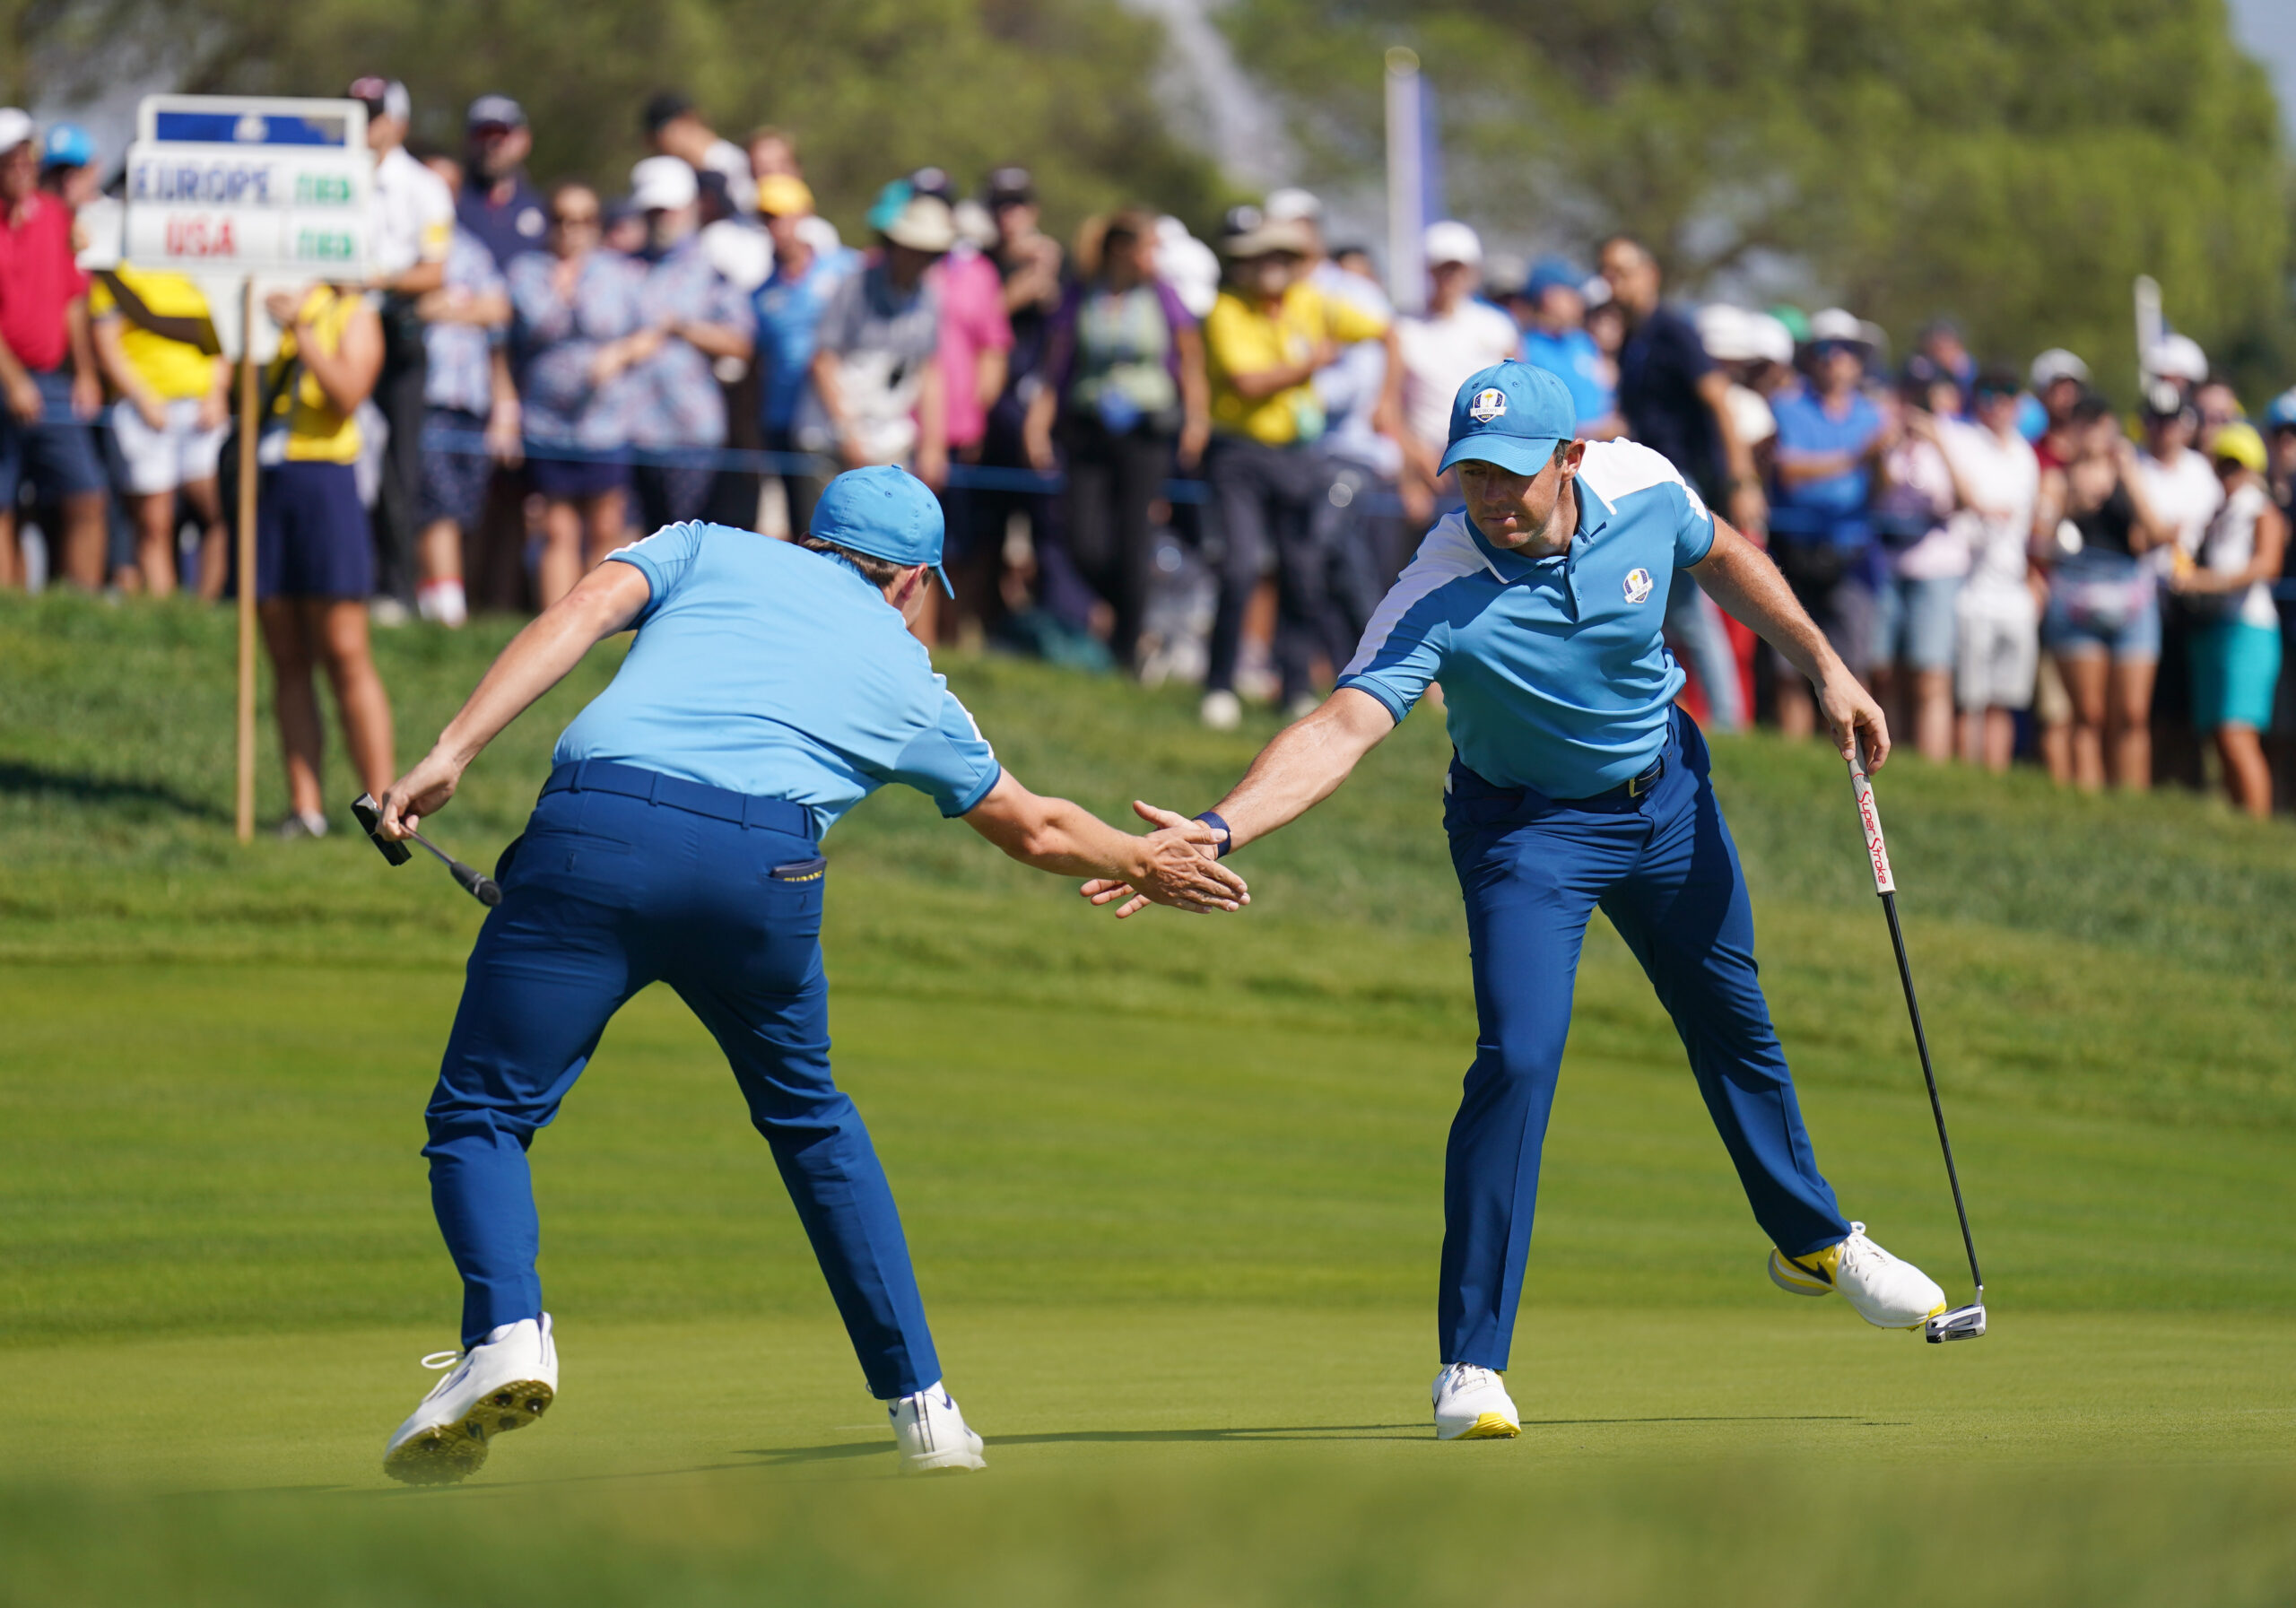 Europe’s Matt Fitzpatrick and Rory McIlroy celebrate on the 2nd during the Fourballs on day one of the 44th Ryder Cup in Rome